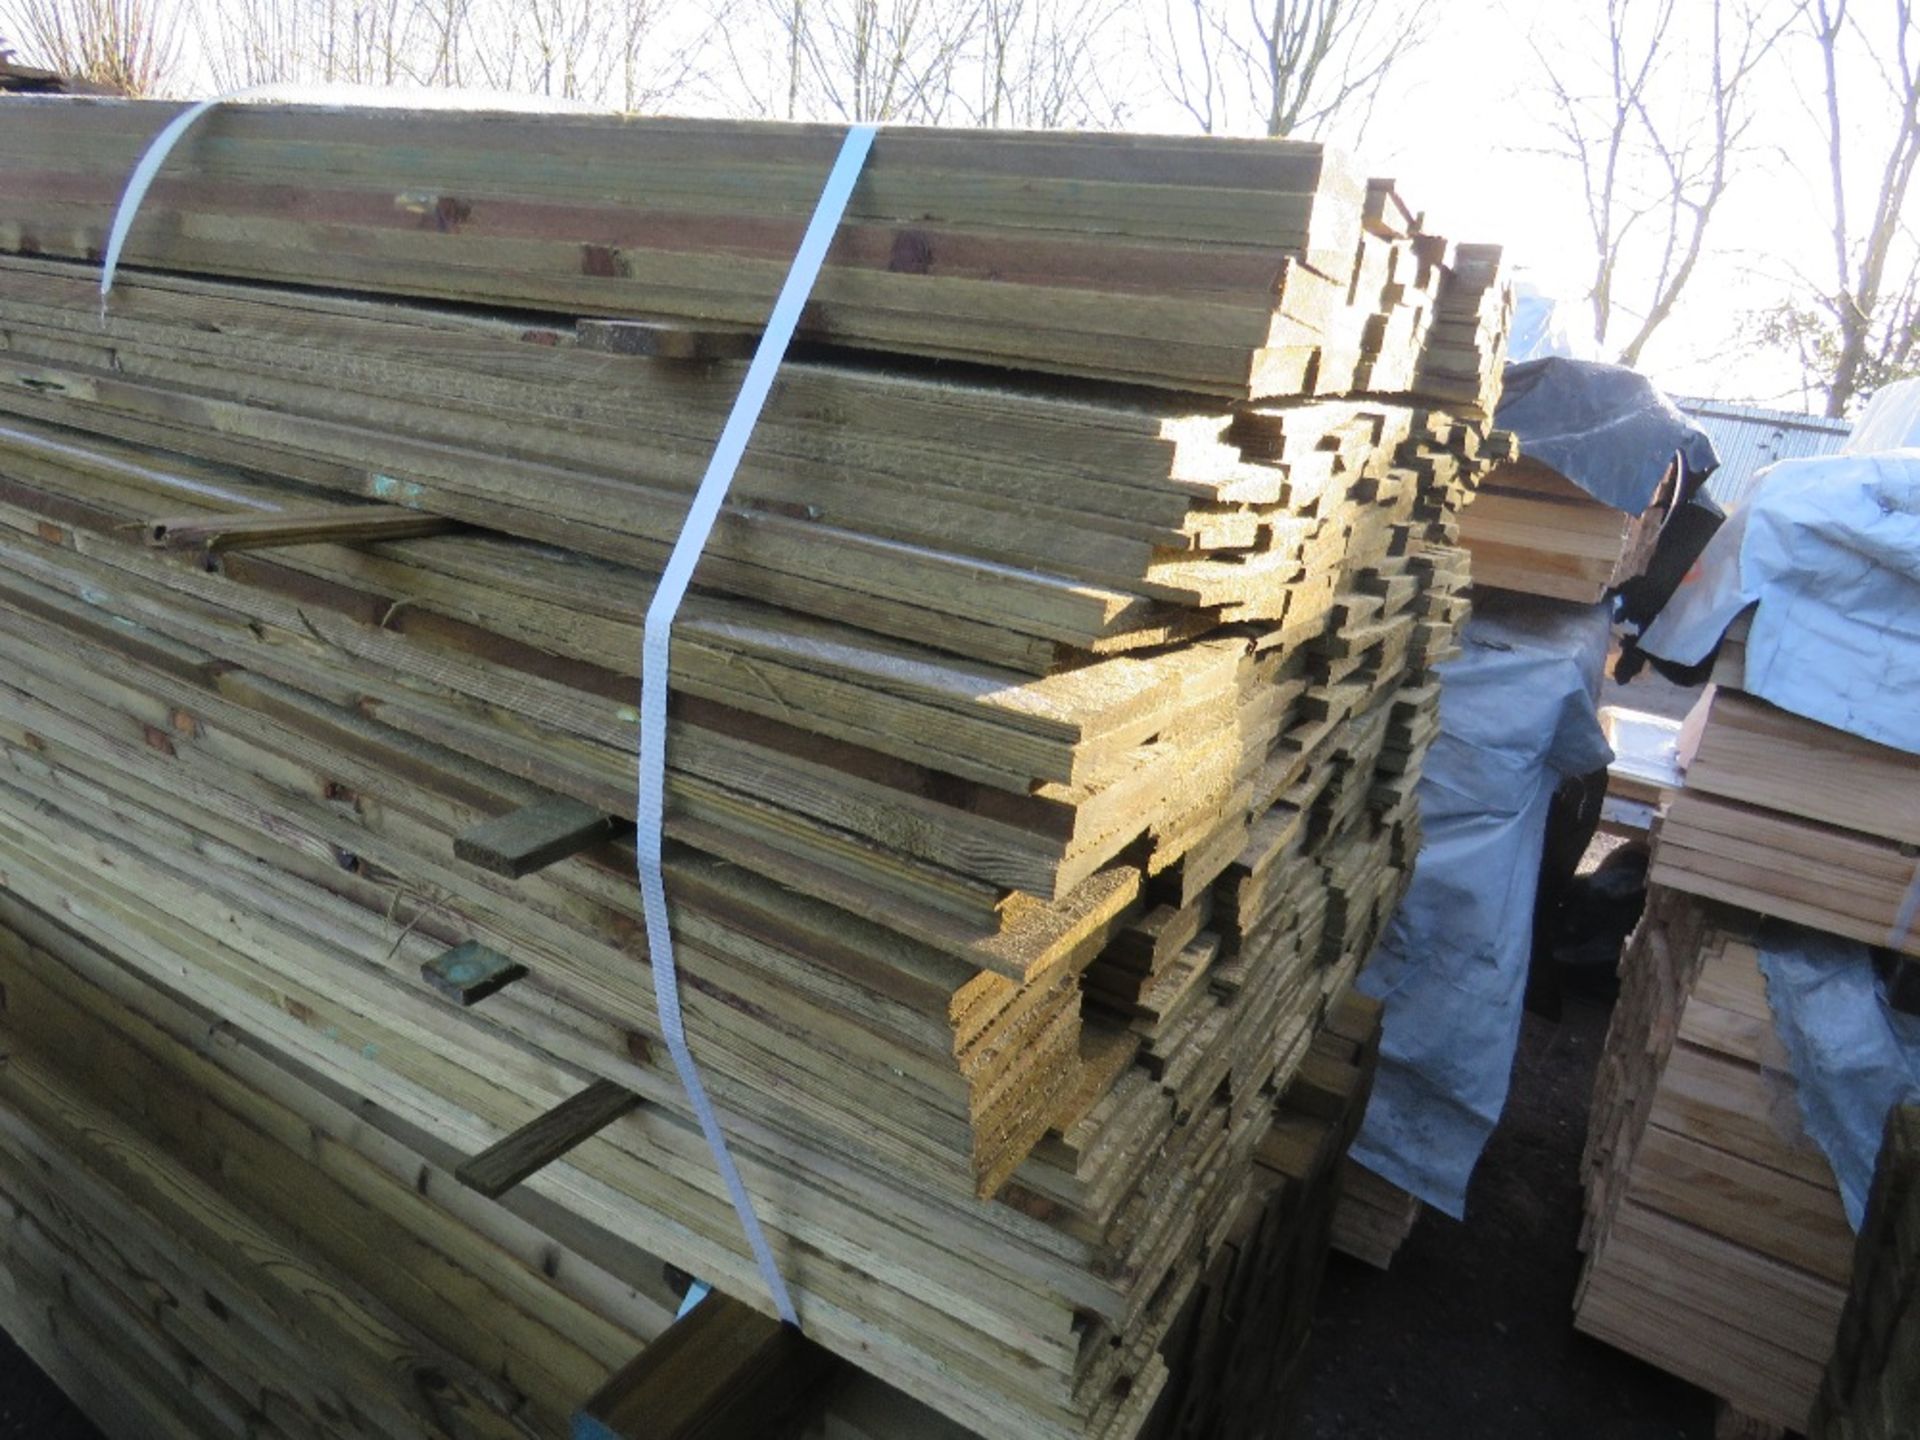 LARGE BUNDLE OF PRESSURE TREATED FEATHER EDGE TIMBER CLADDING: 1.65M LENGTH X 10CM WIDTH APPROX. - Image 2 of 3